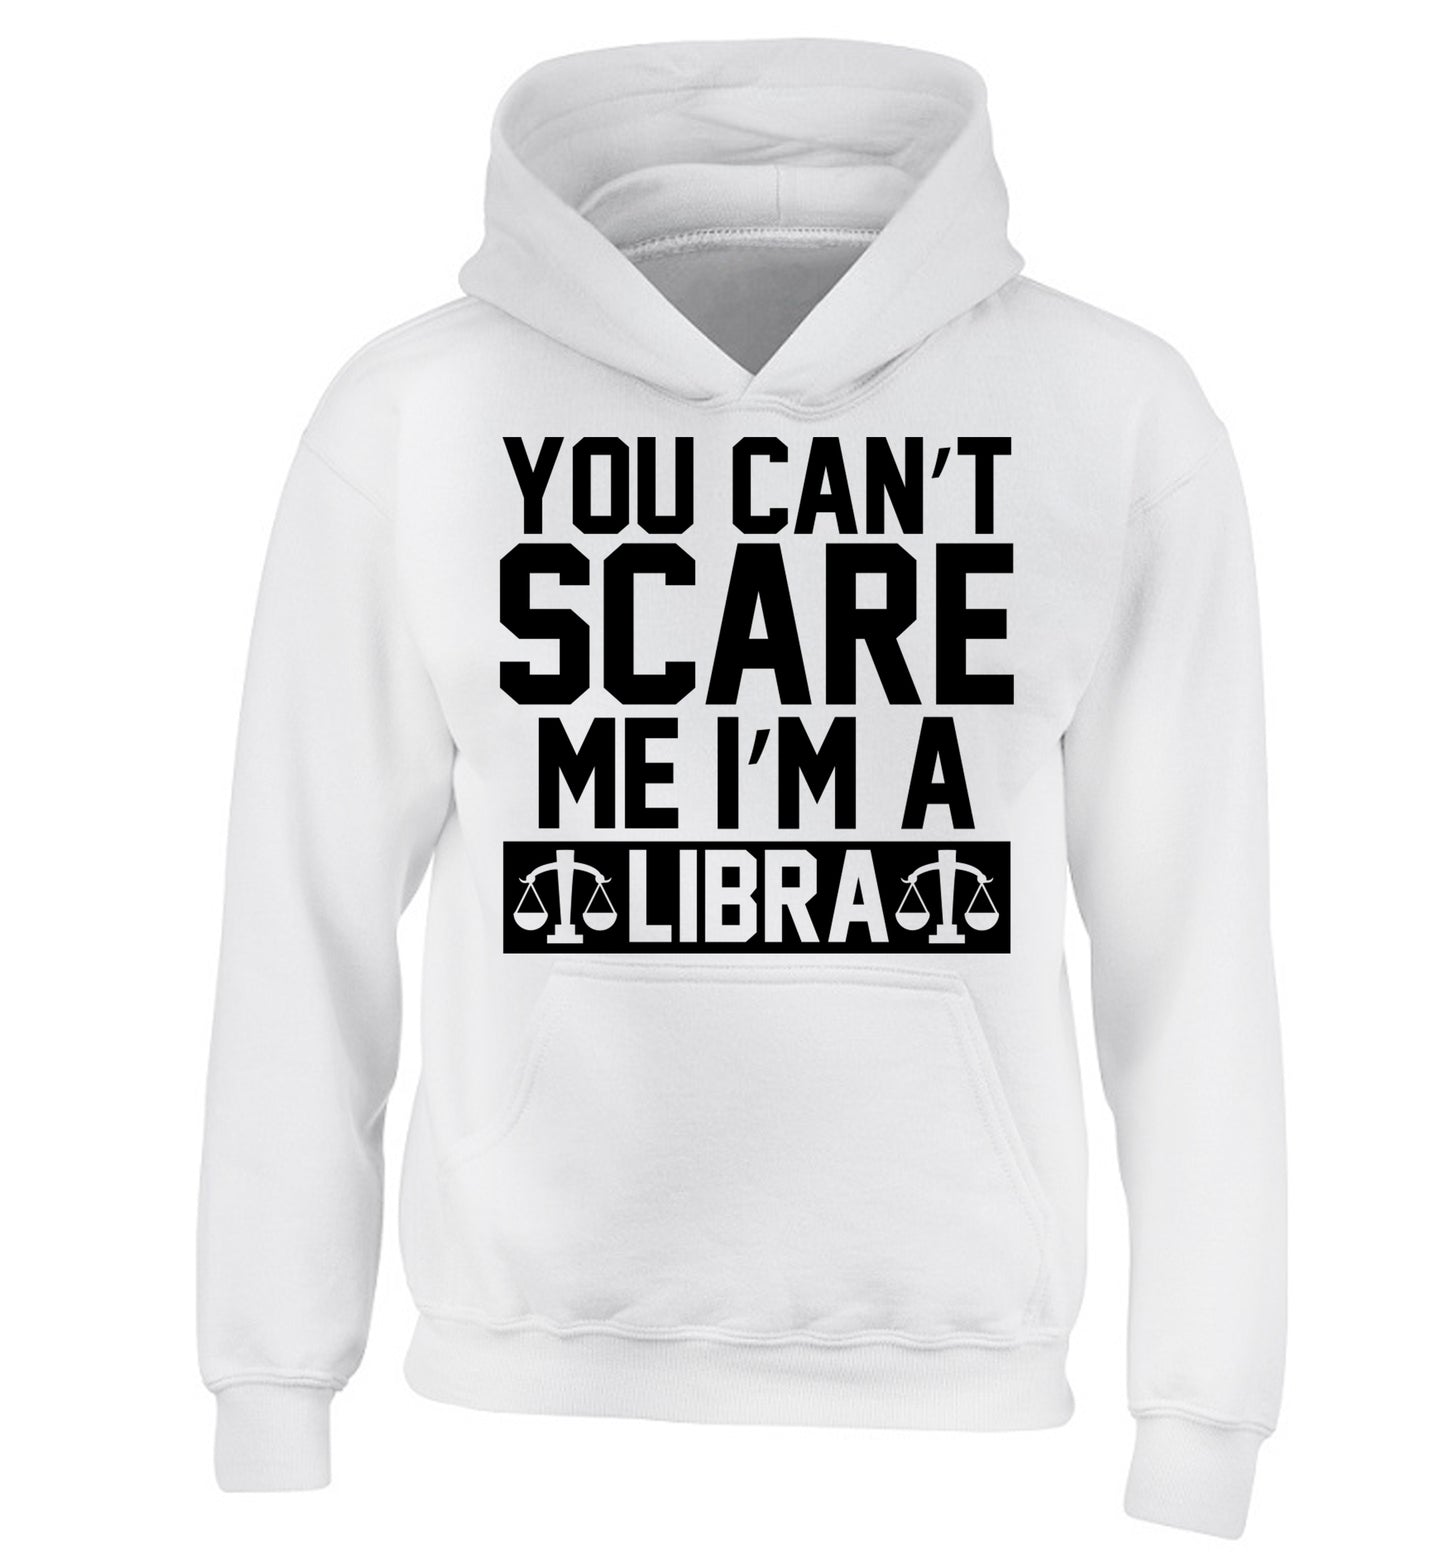 You can't scare me I'm a libra children's white hoodie 12-13 Years